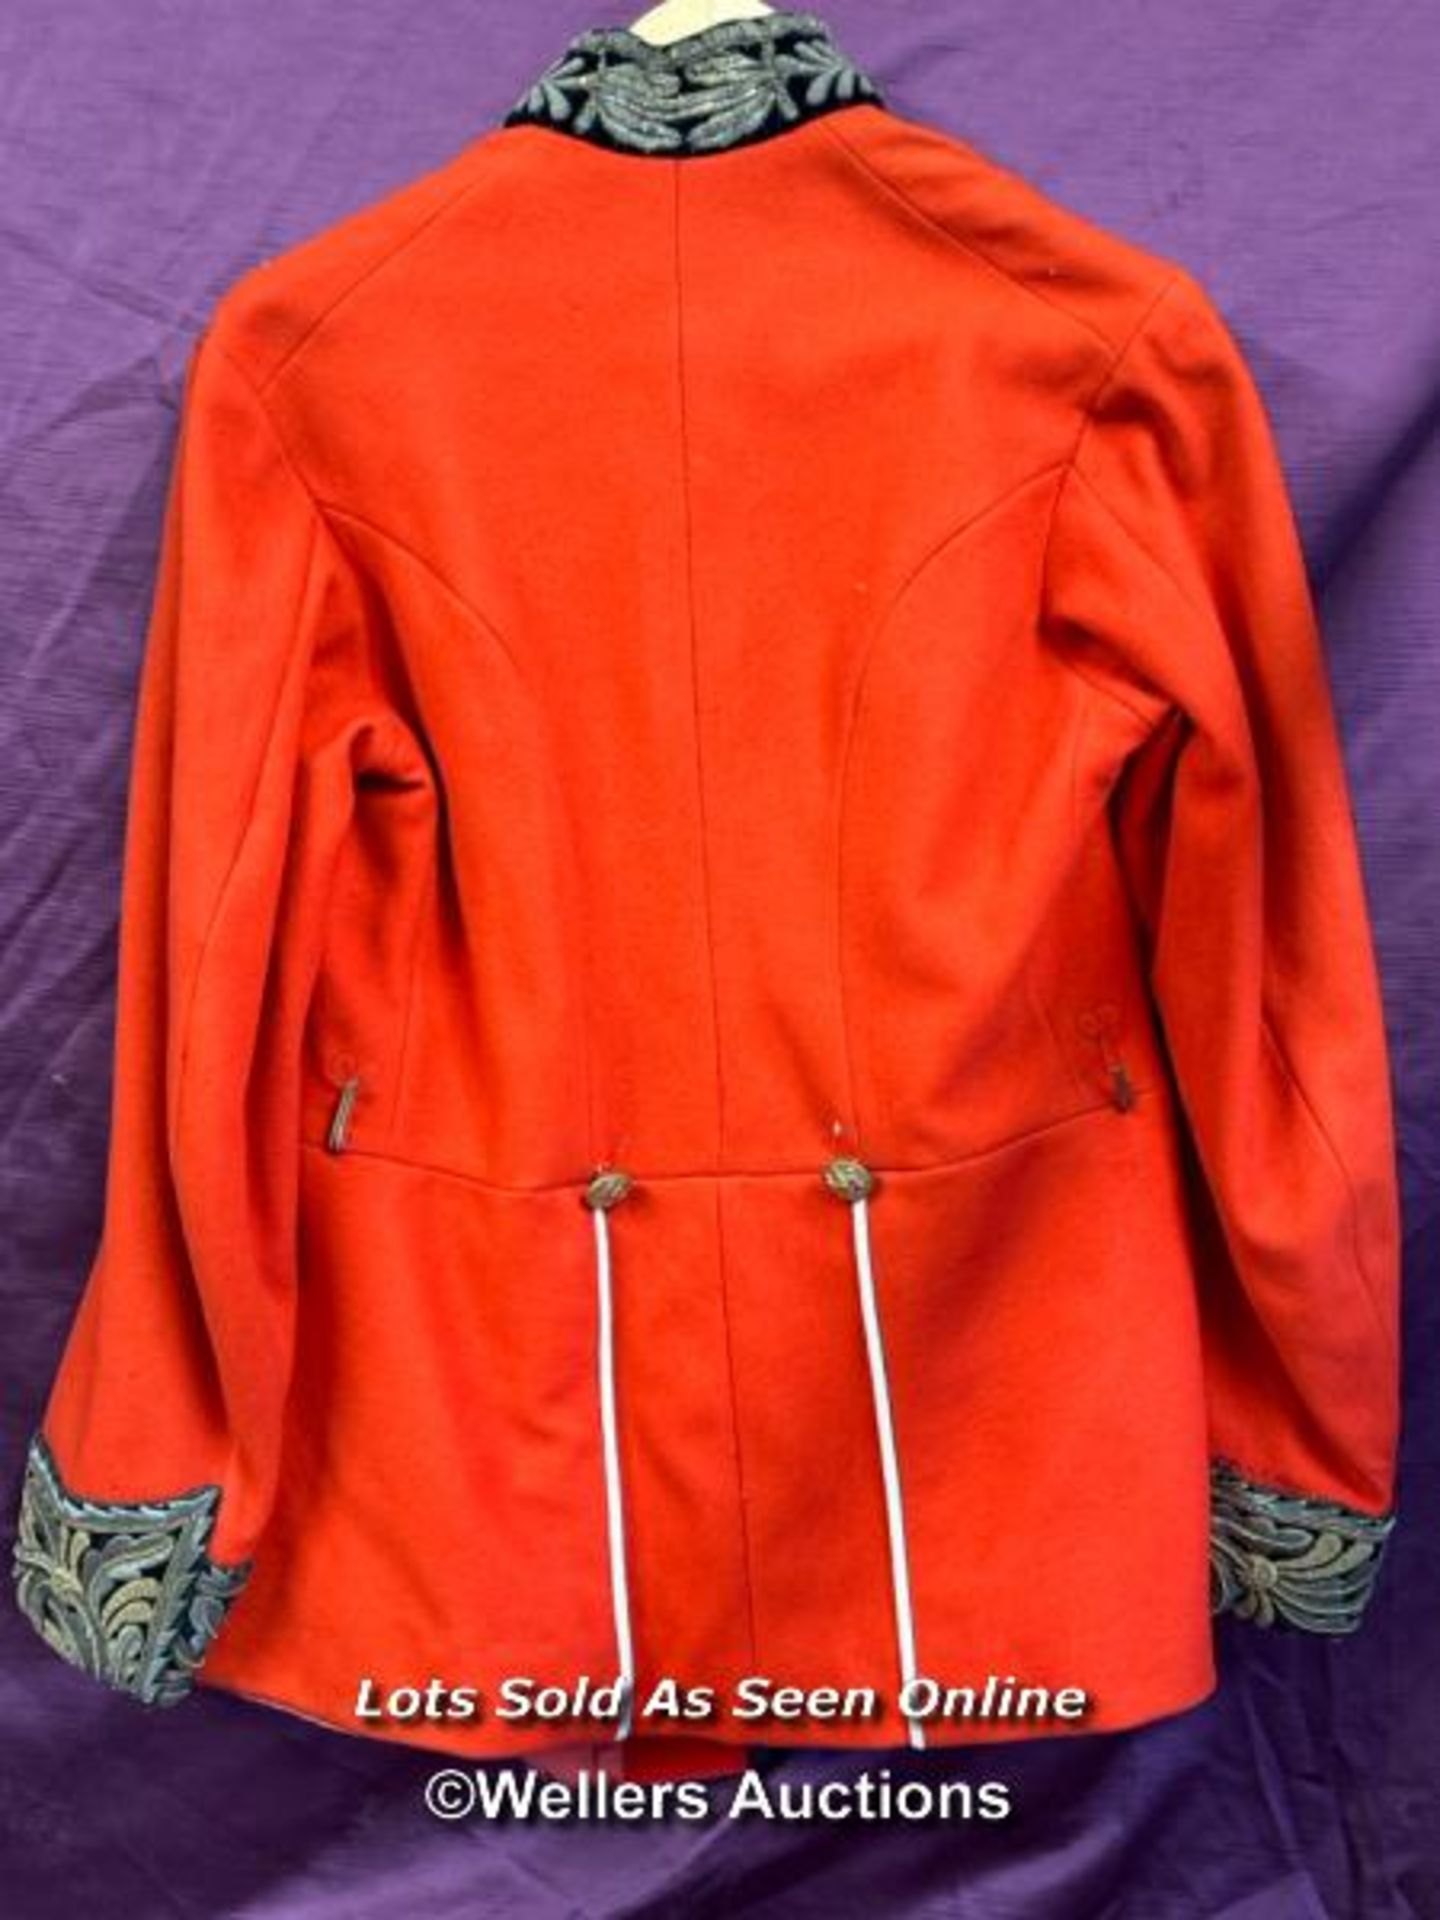 LORD LIEUTENANT ORNATE RED MILITARY DRESS TUNIC - Image 6 of 6